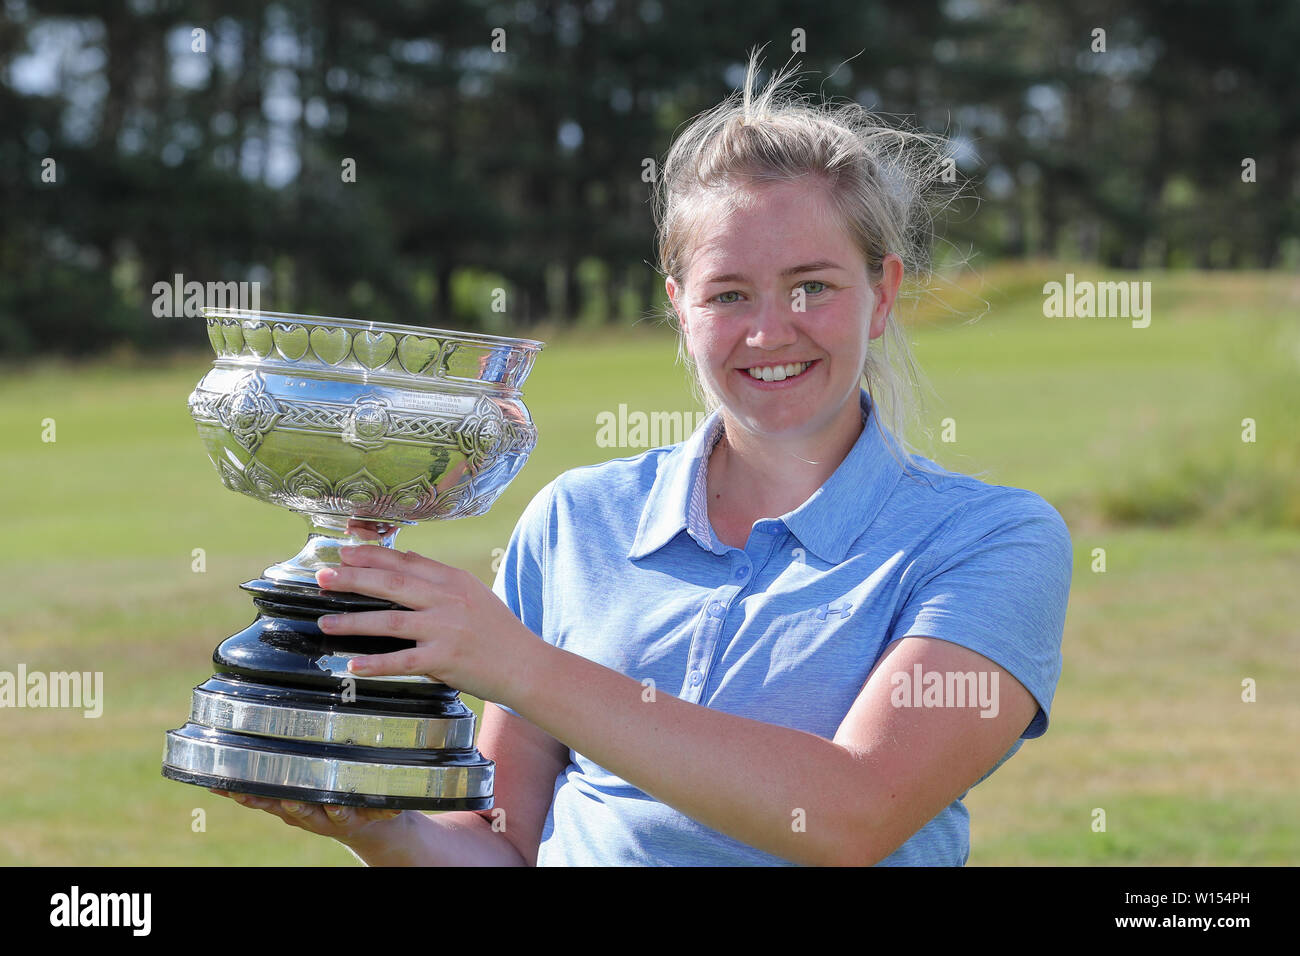 Troon, Scotland, UK. 30th June 2019. One the final round of the Scottish Women's Amateur Championship Clark Rosebowl the Championship Cup was won by KIMBERLEY BEVERIDGE from Aboyne Golf Club and the Silver Plate was won by MEGAN ROBB from Banchory Golf Club.Image of Kimberley Beveridge with the Challenge Cup ytrophy Credit: Findlay/Alamy Live News Stock Photo